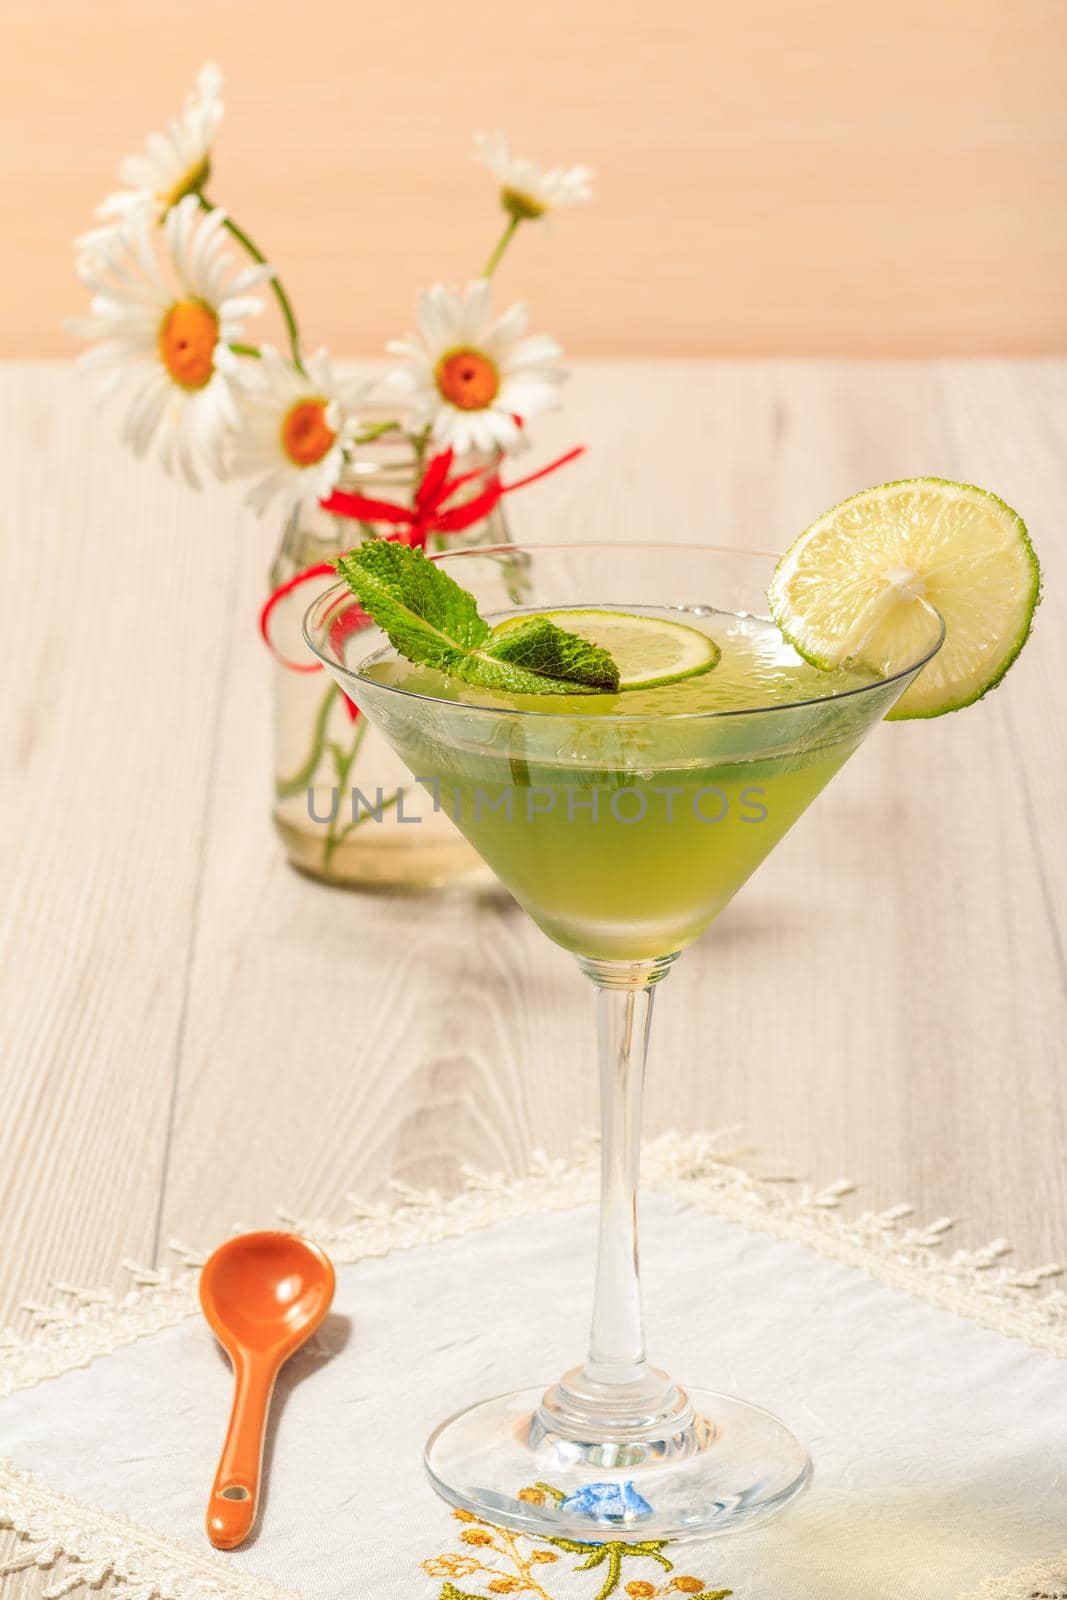 Kiwi jelly with lime pieces in the glass and bouquet of chamomiles on the wooden background